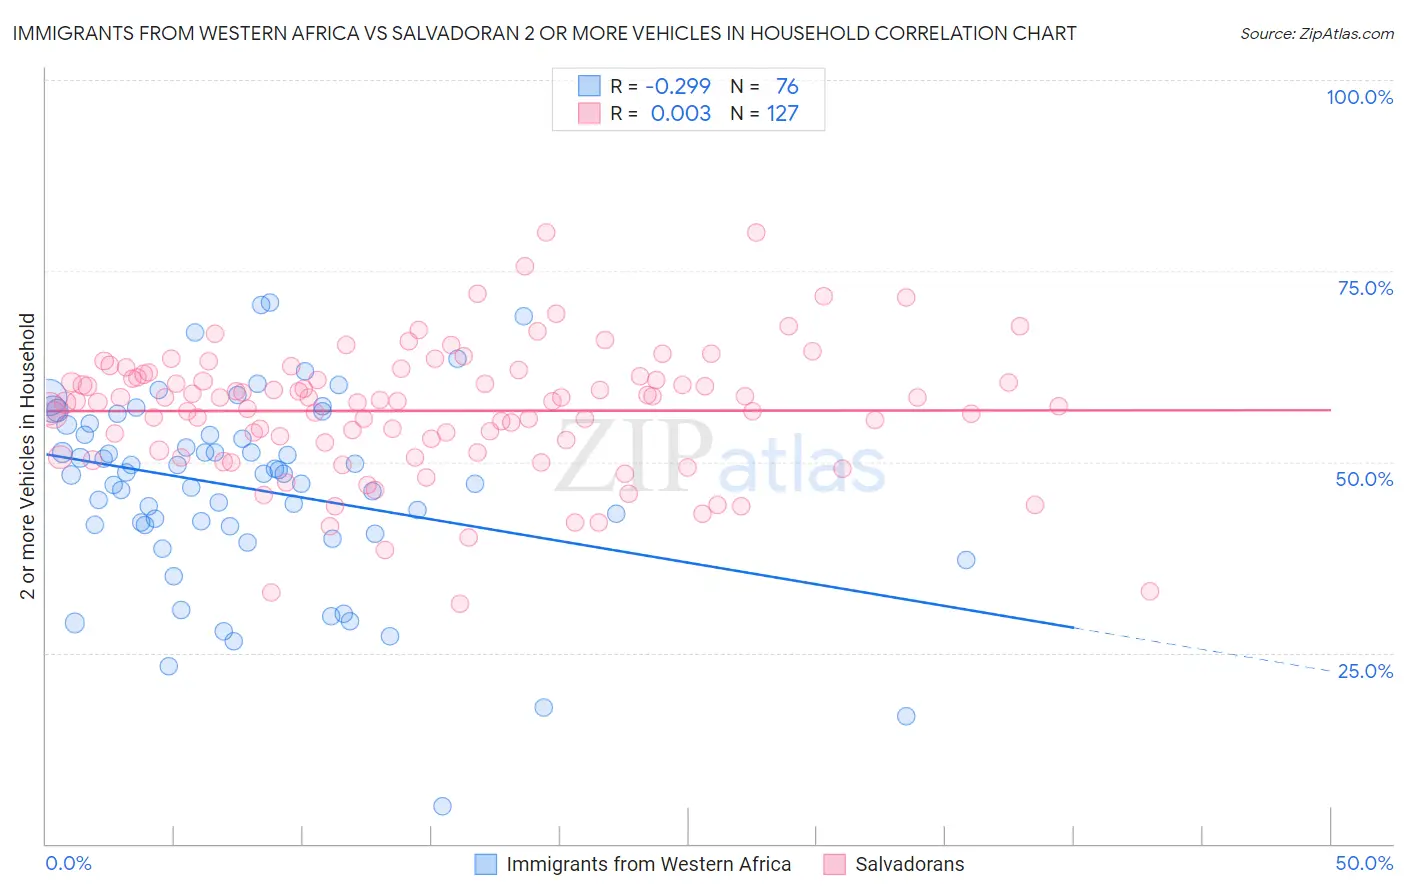 Immigrants from Western Africa vs Salvadoran 2 or more Vehicles in Household